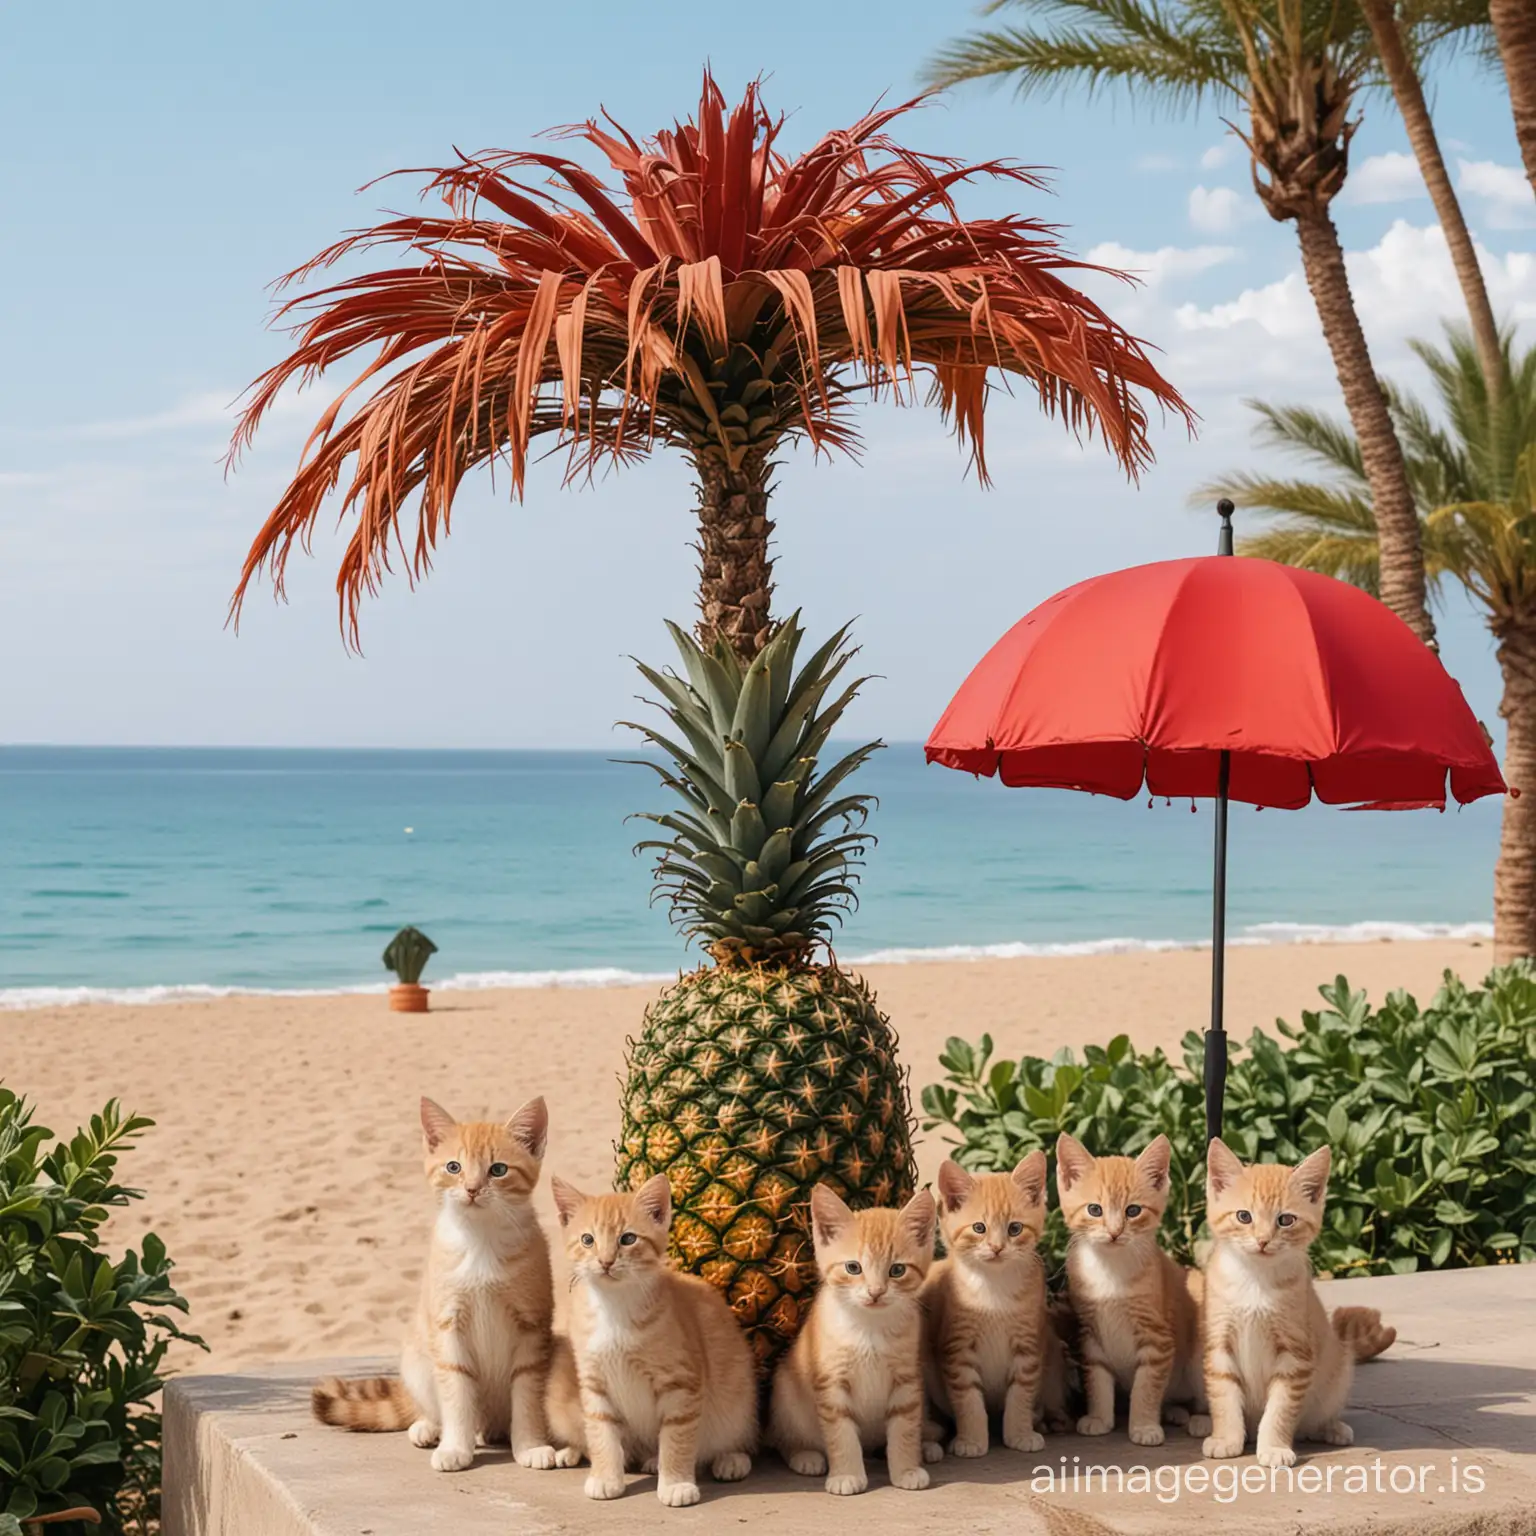 Iron-Pineapple-Amidst-Red-Sea-with-Kittens-Under-Umbrellas